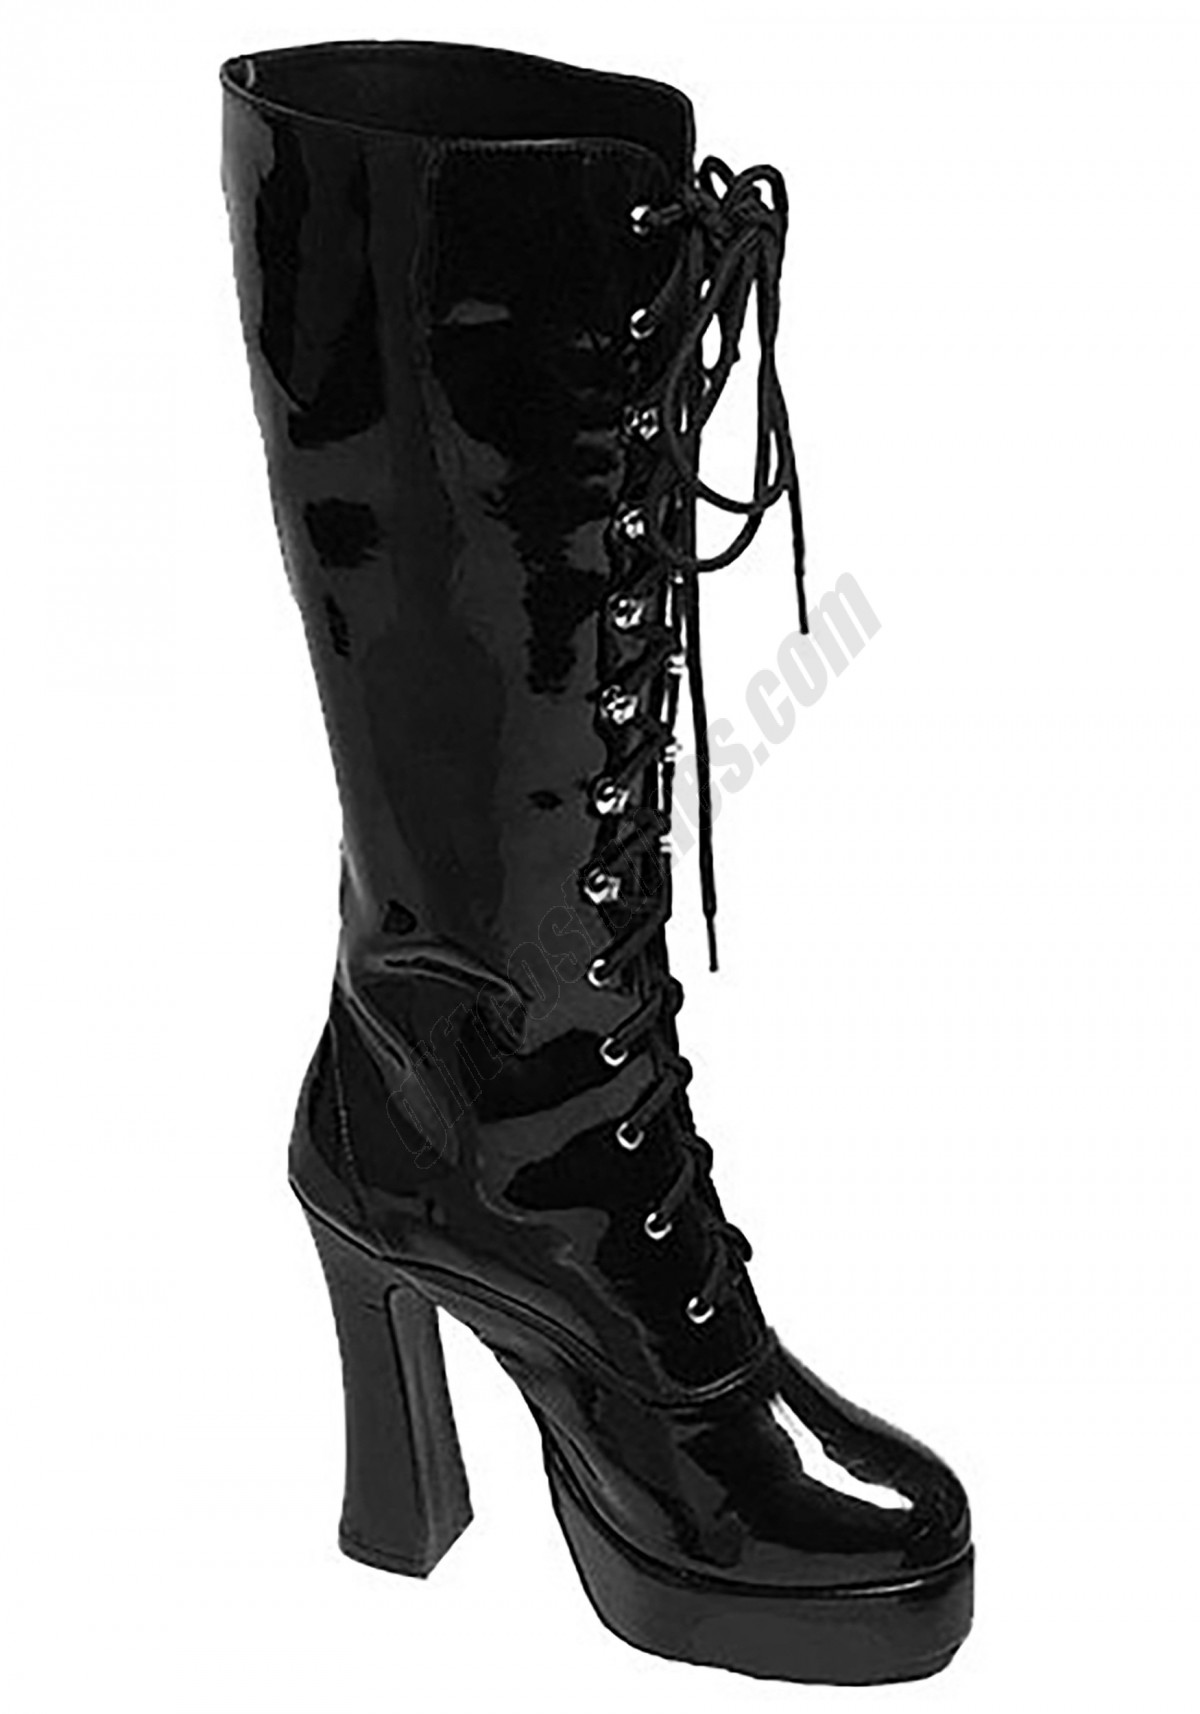 Sexy Black Faux Leather Knee High Boots Promotions - -0